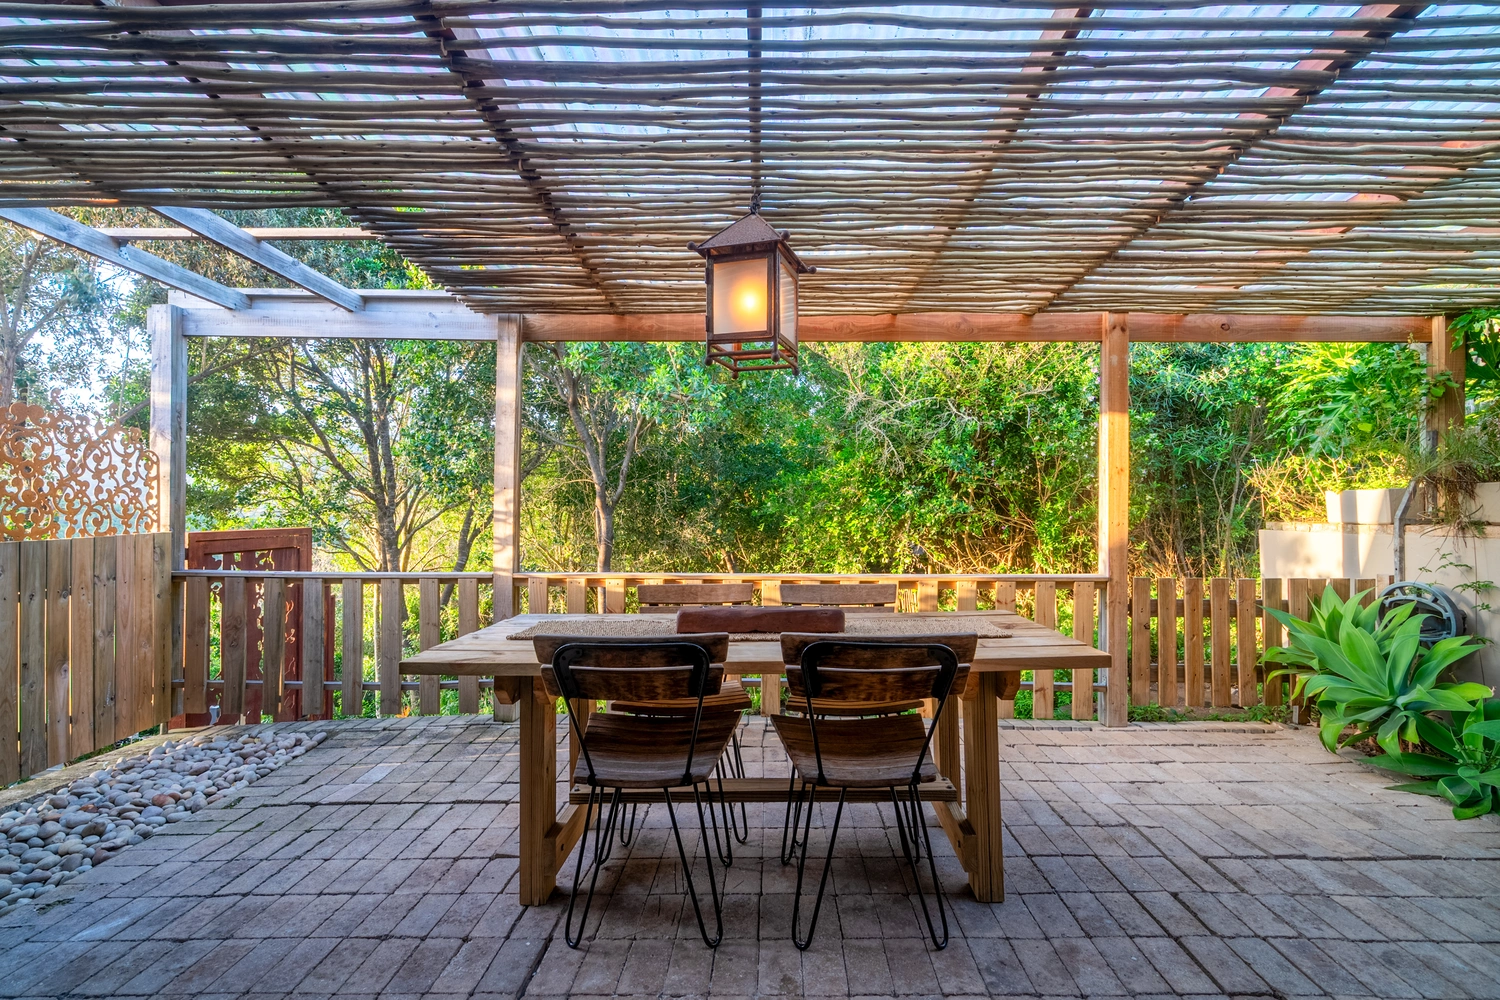 BBQ facilities are available on the forest patio.